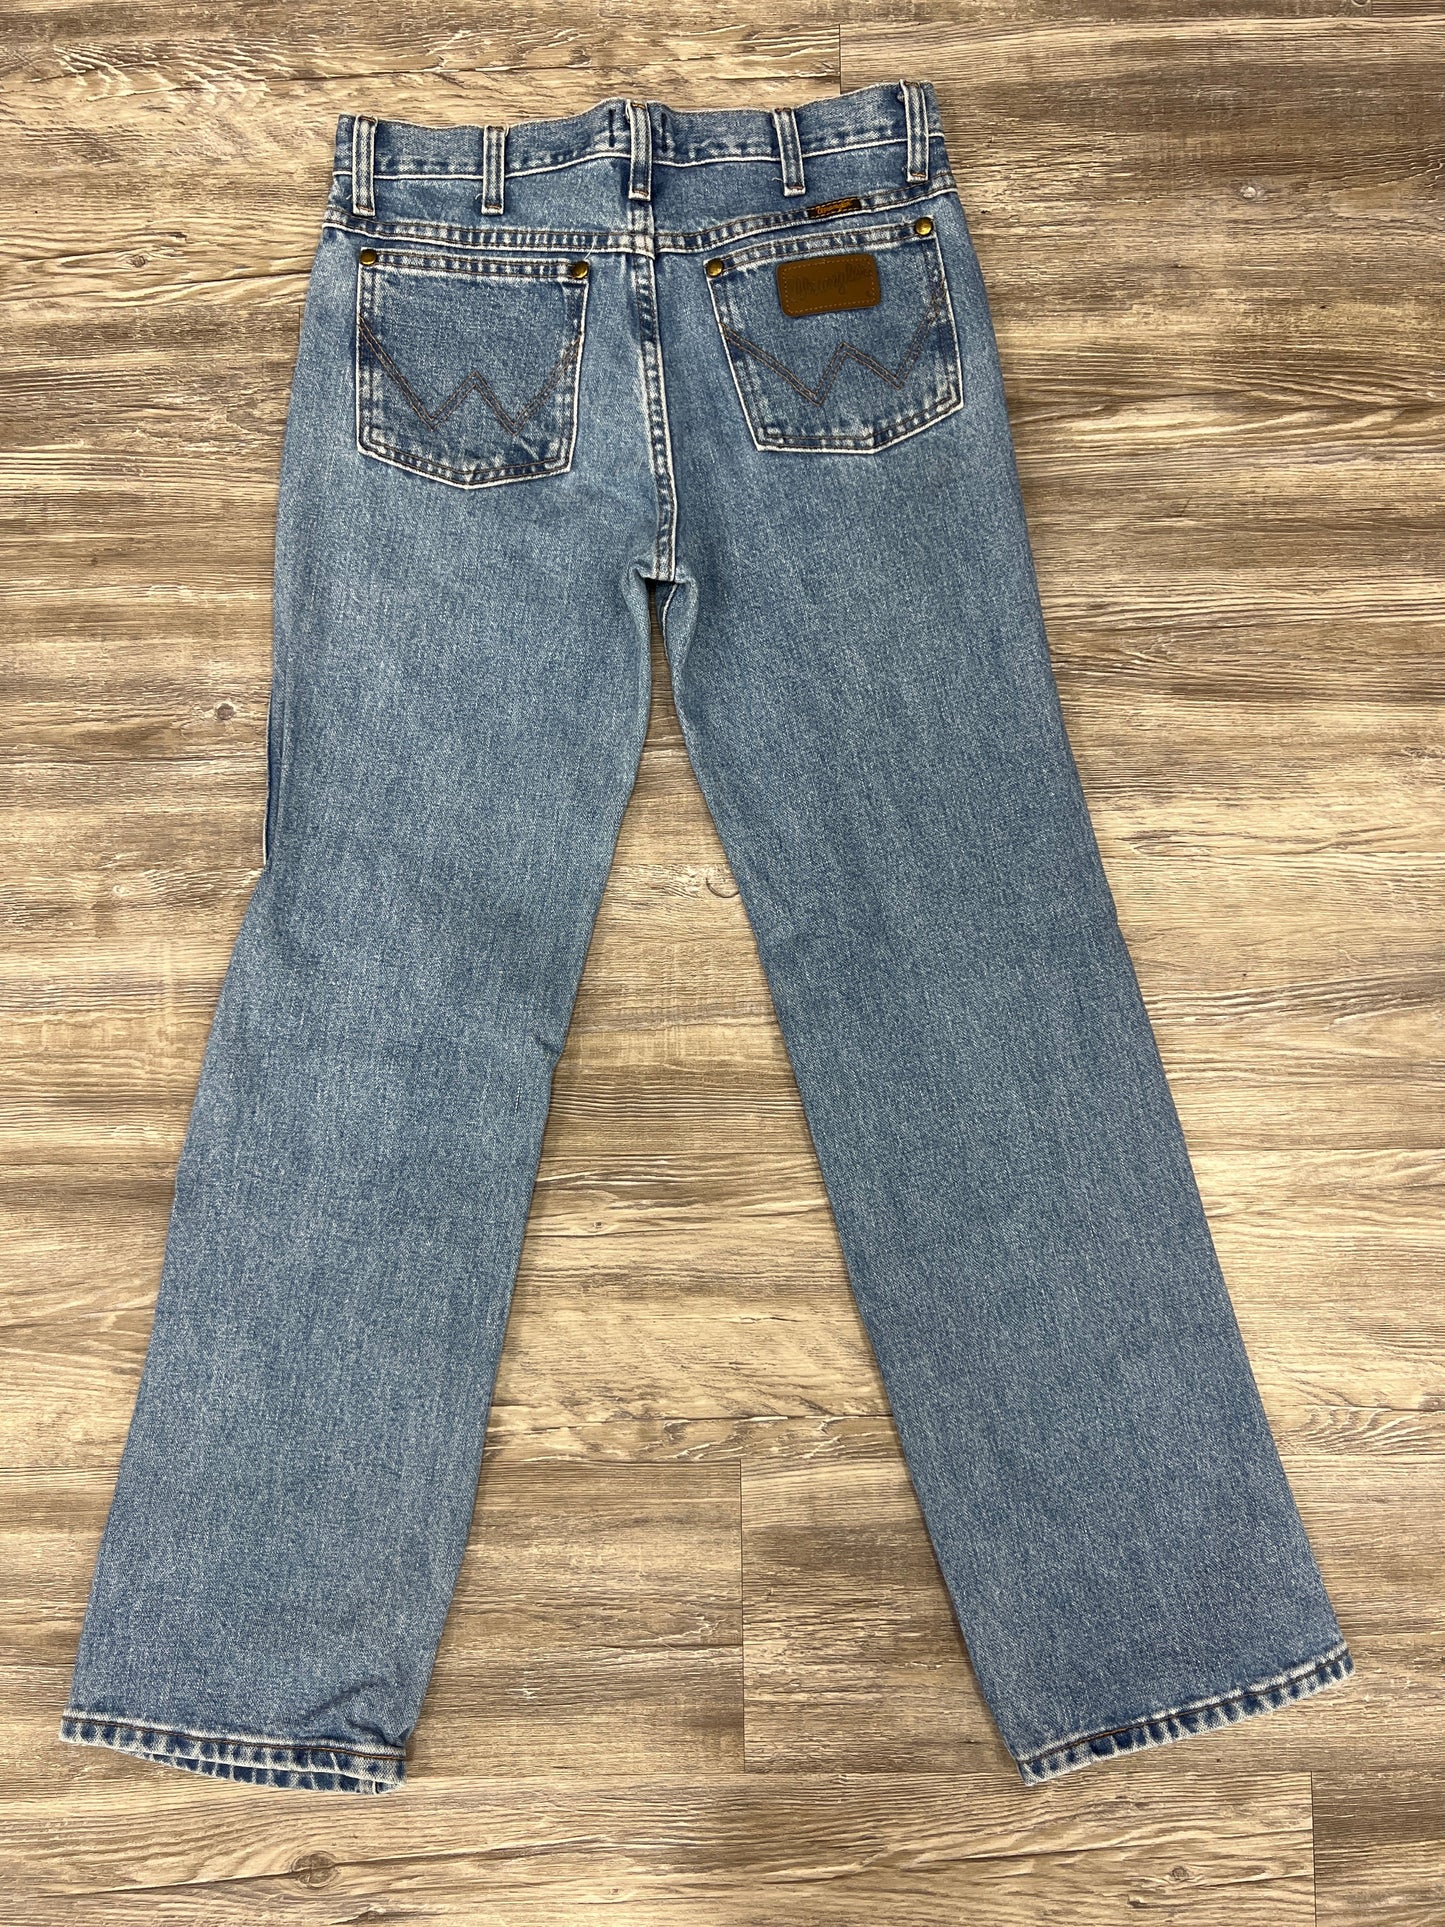 Jeans Straight By Wrangler Size: 29